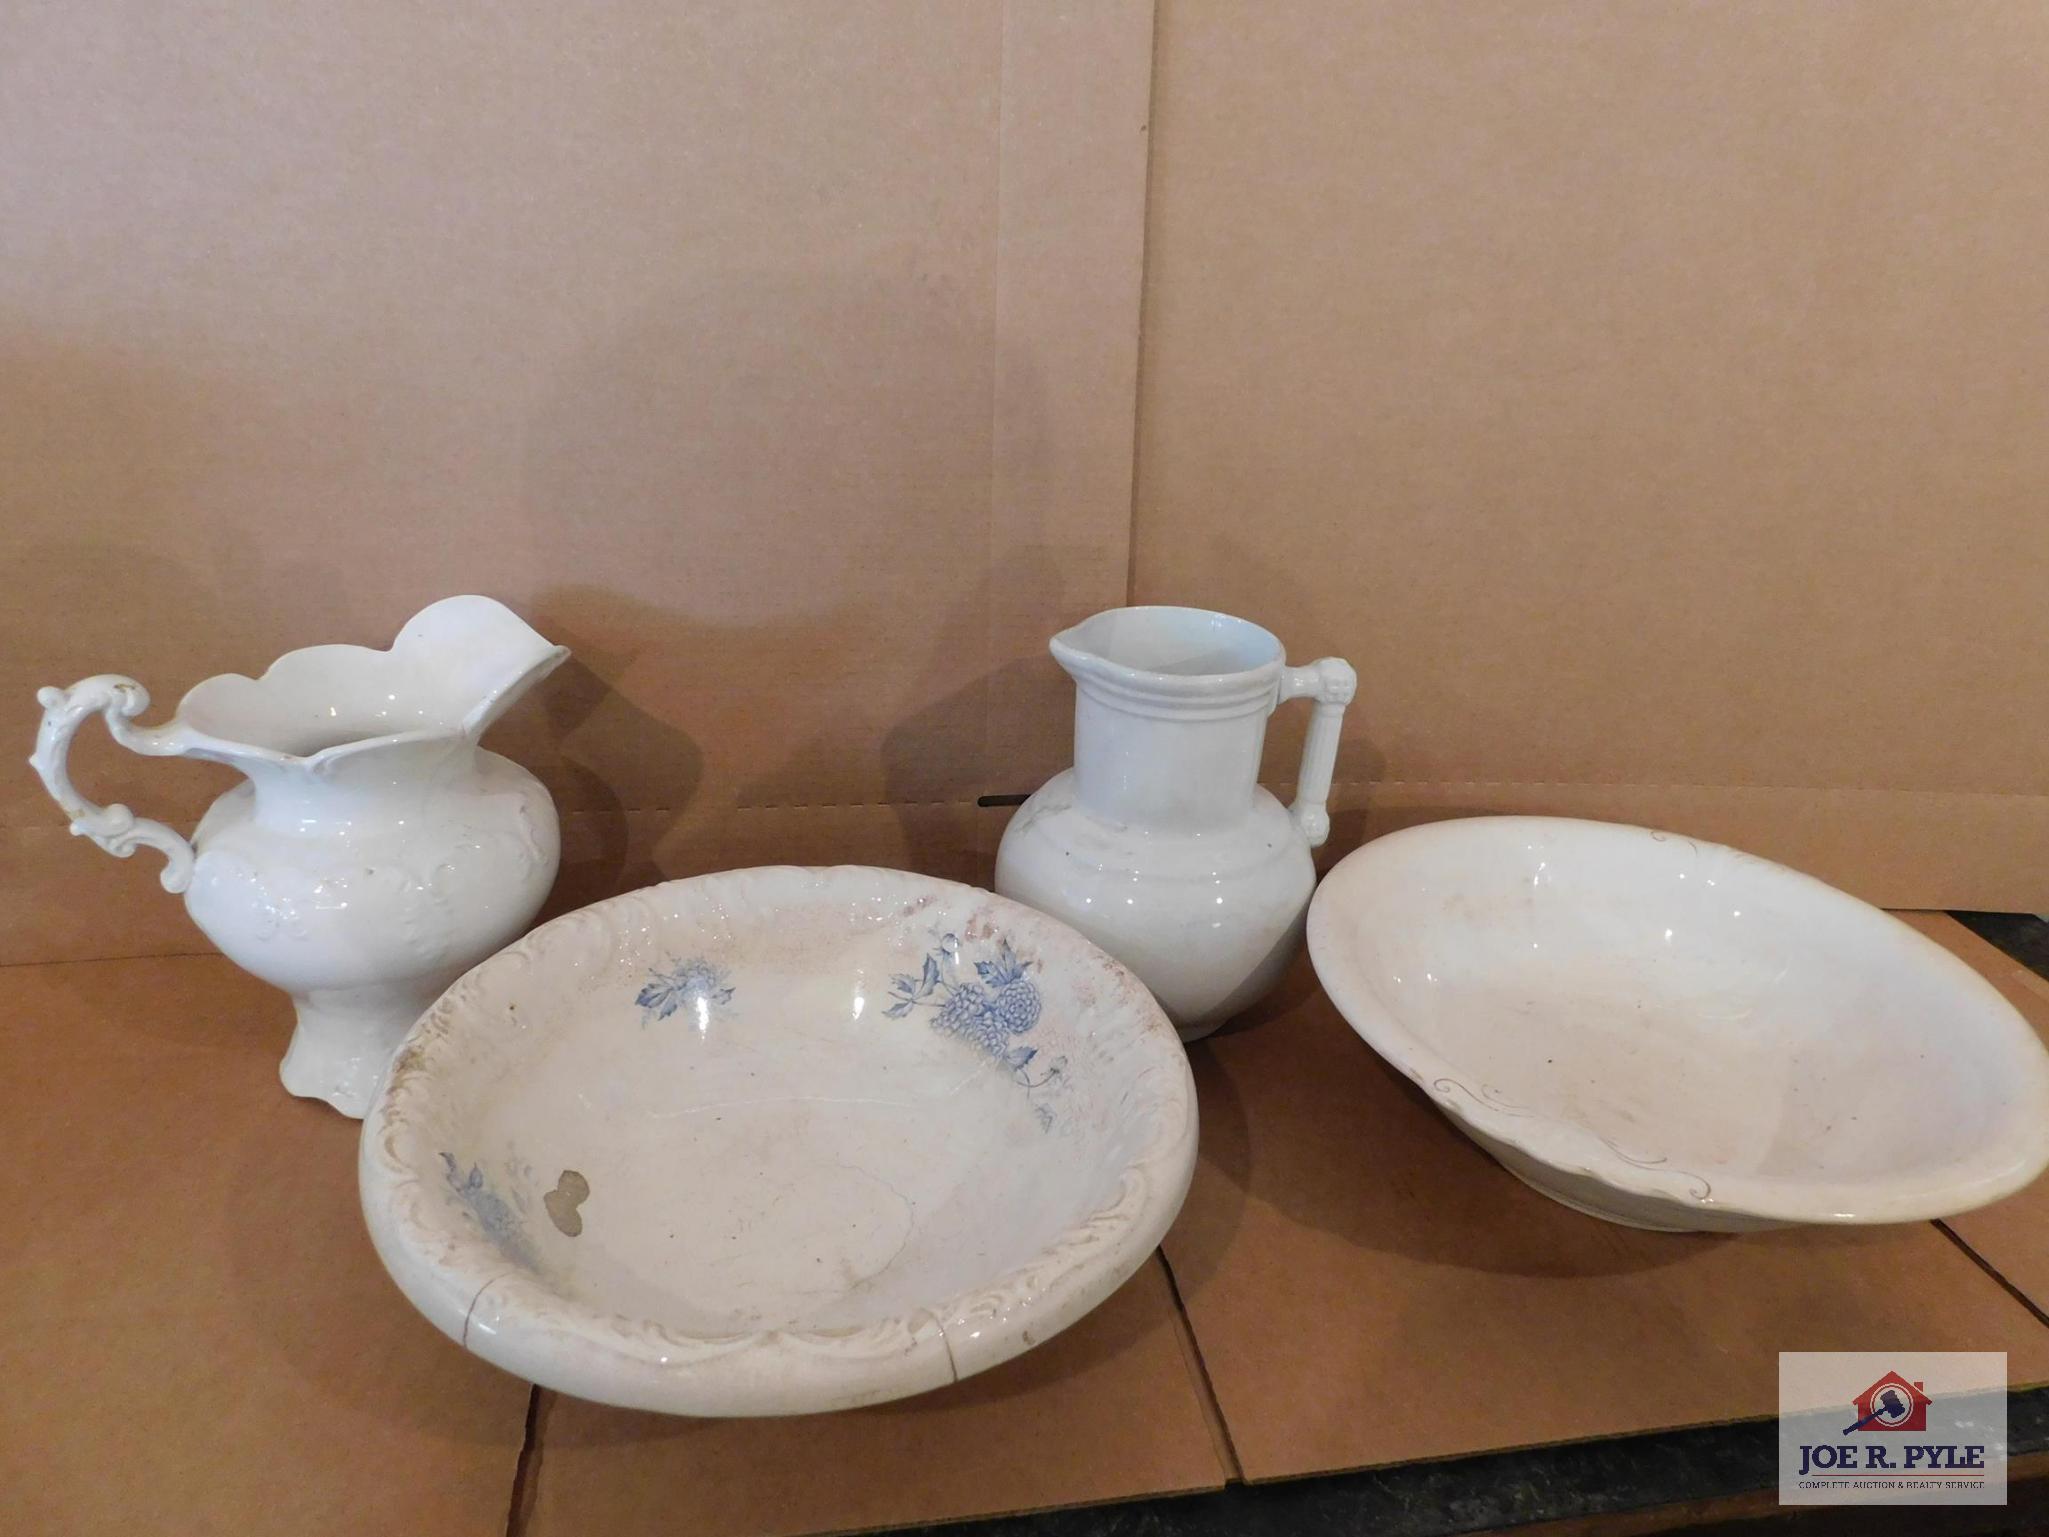 Two Non-Matching Pitcher And Bowls- One Pitcher Is Ironstone China